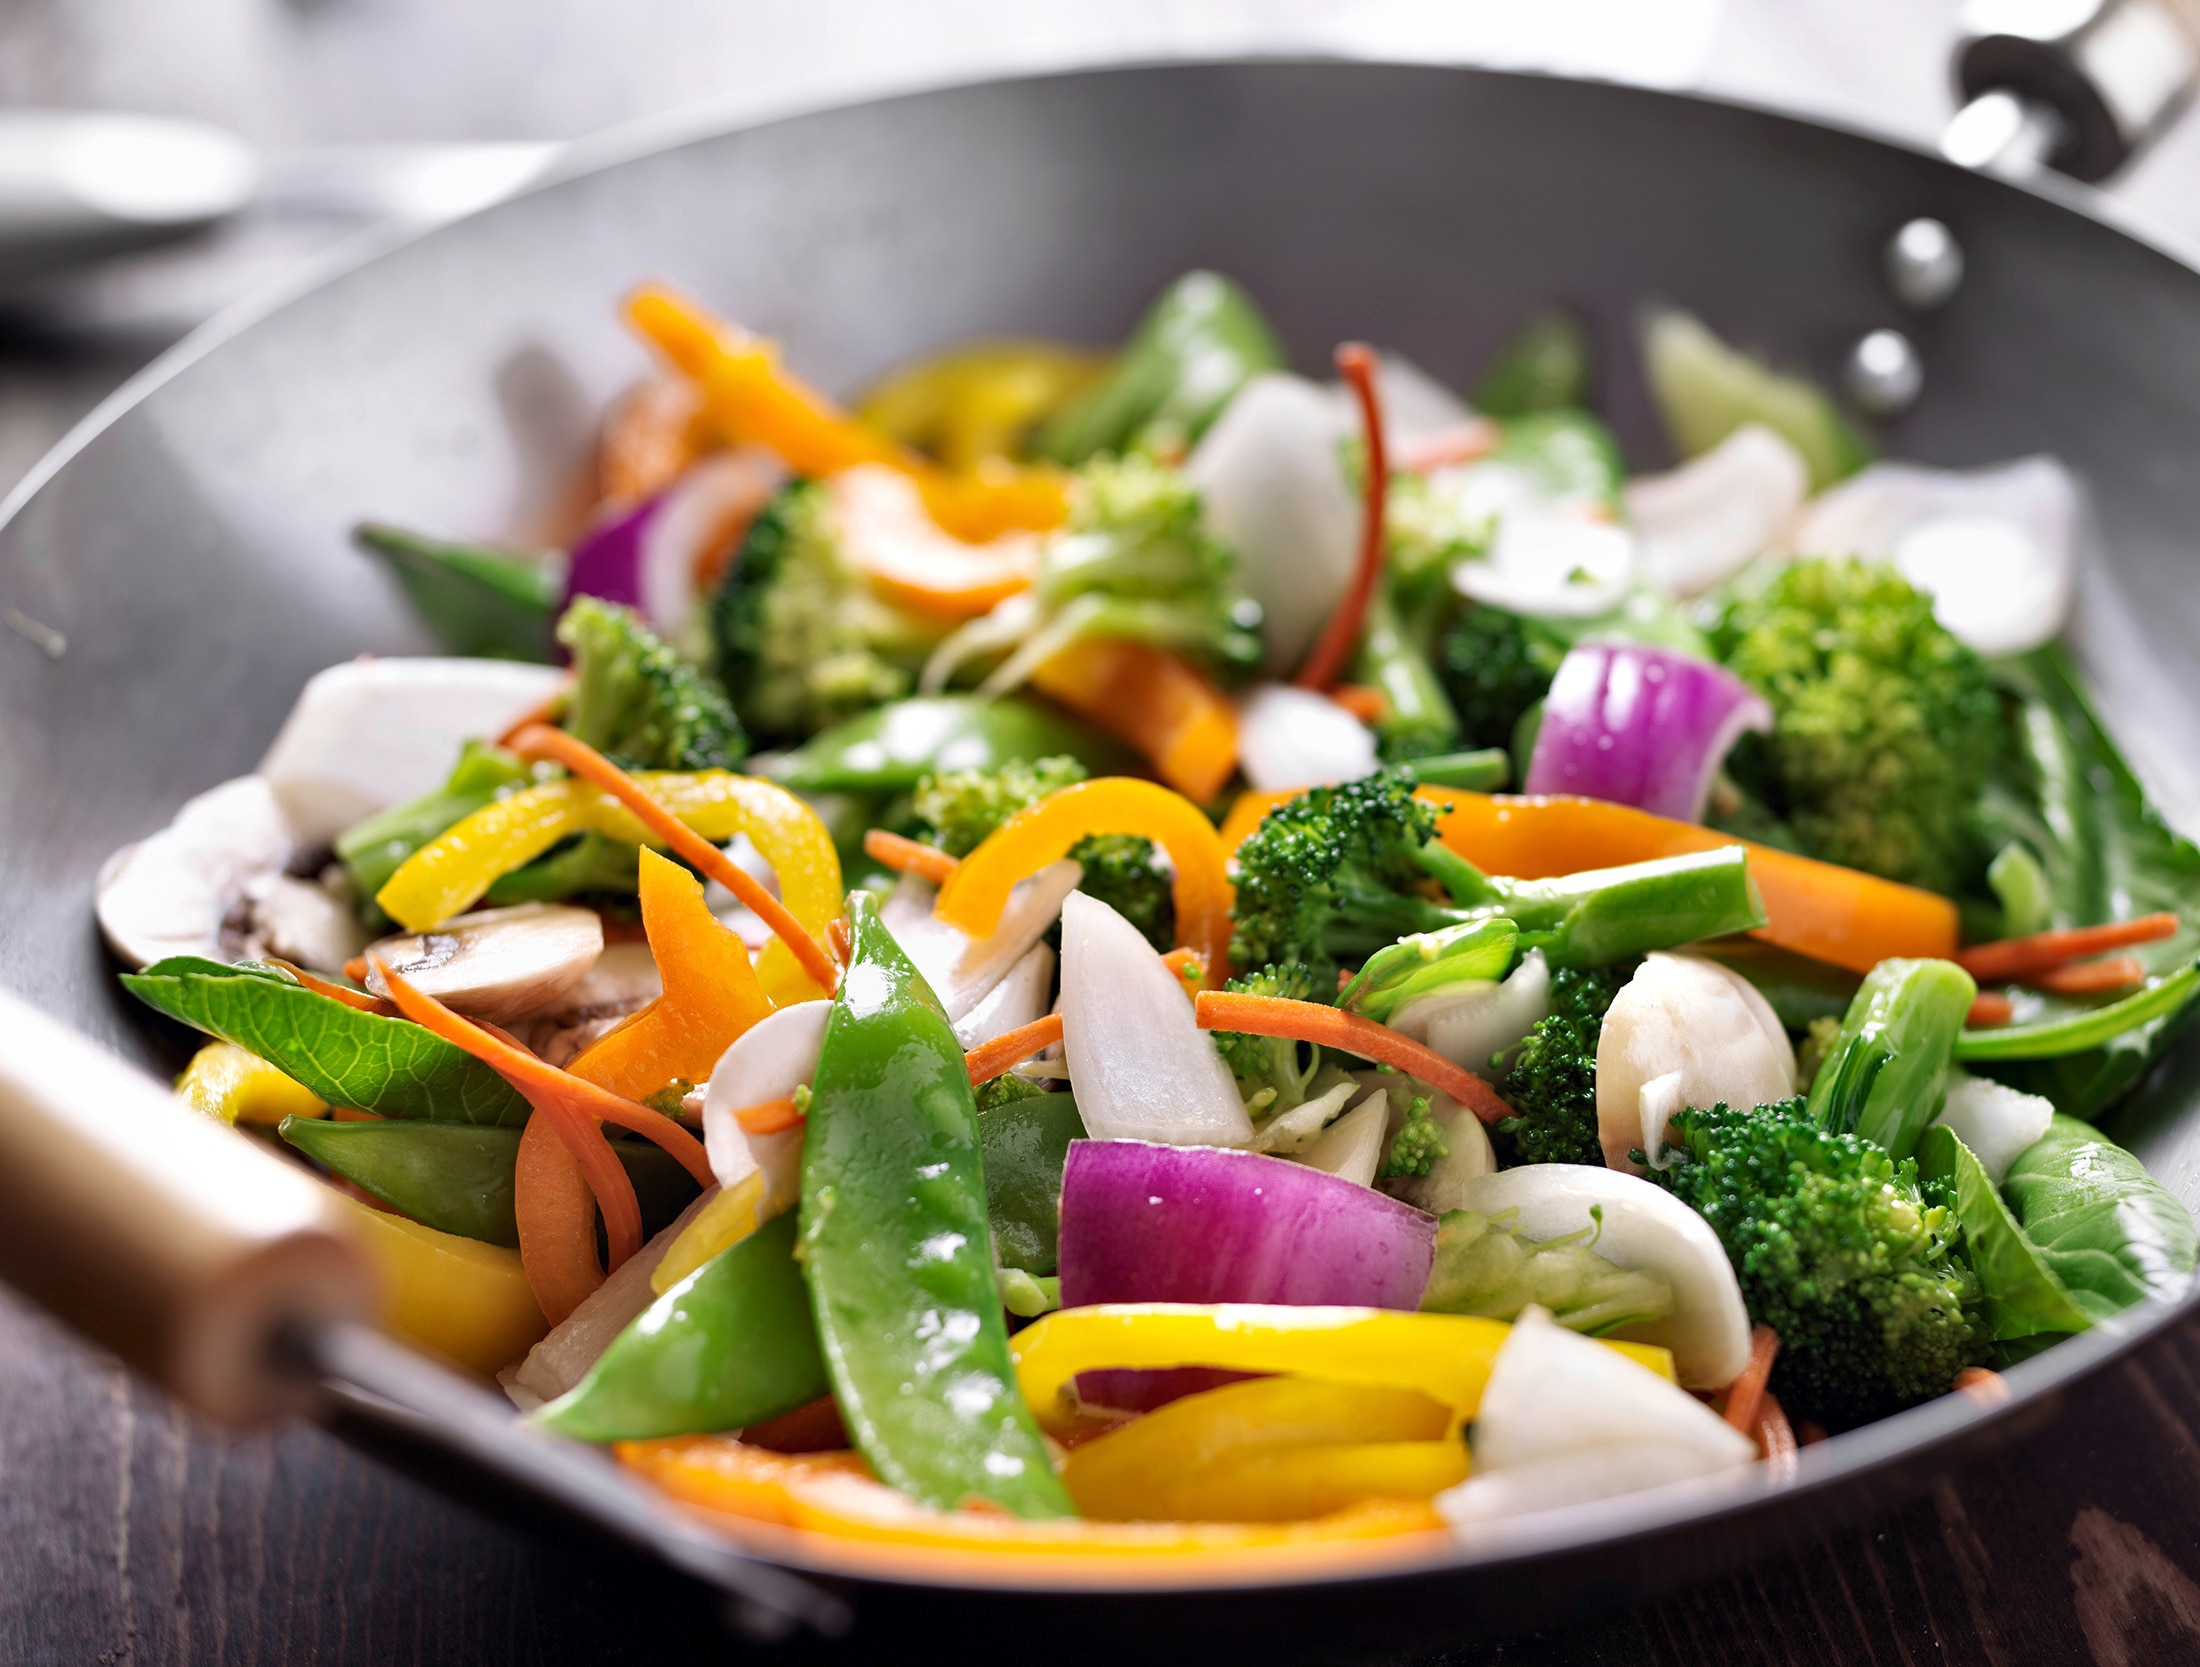 Stir-fried vegetables being cooked in a wok